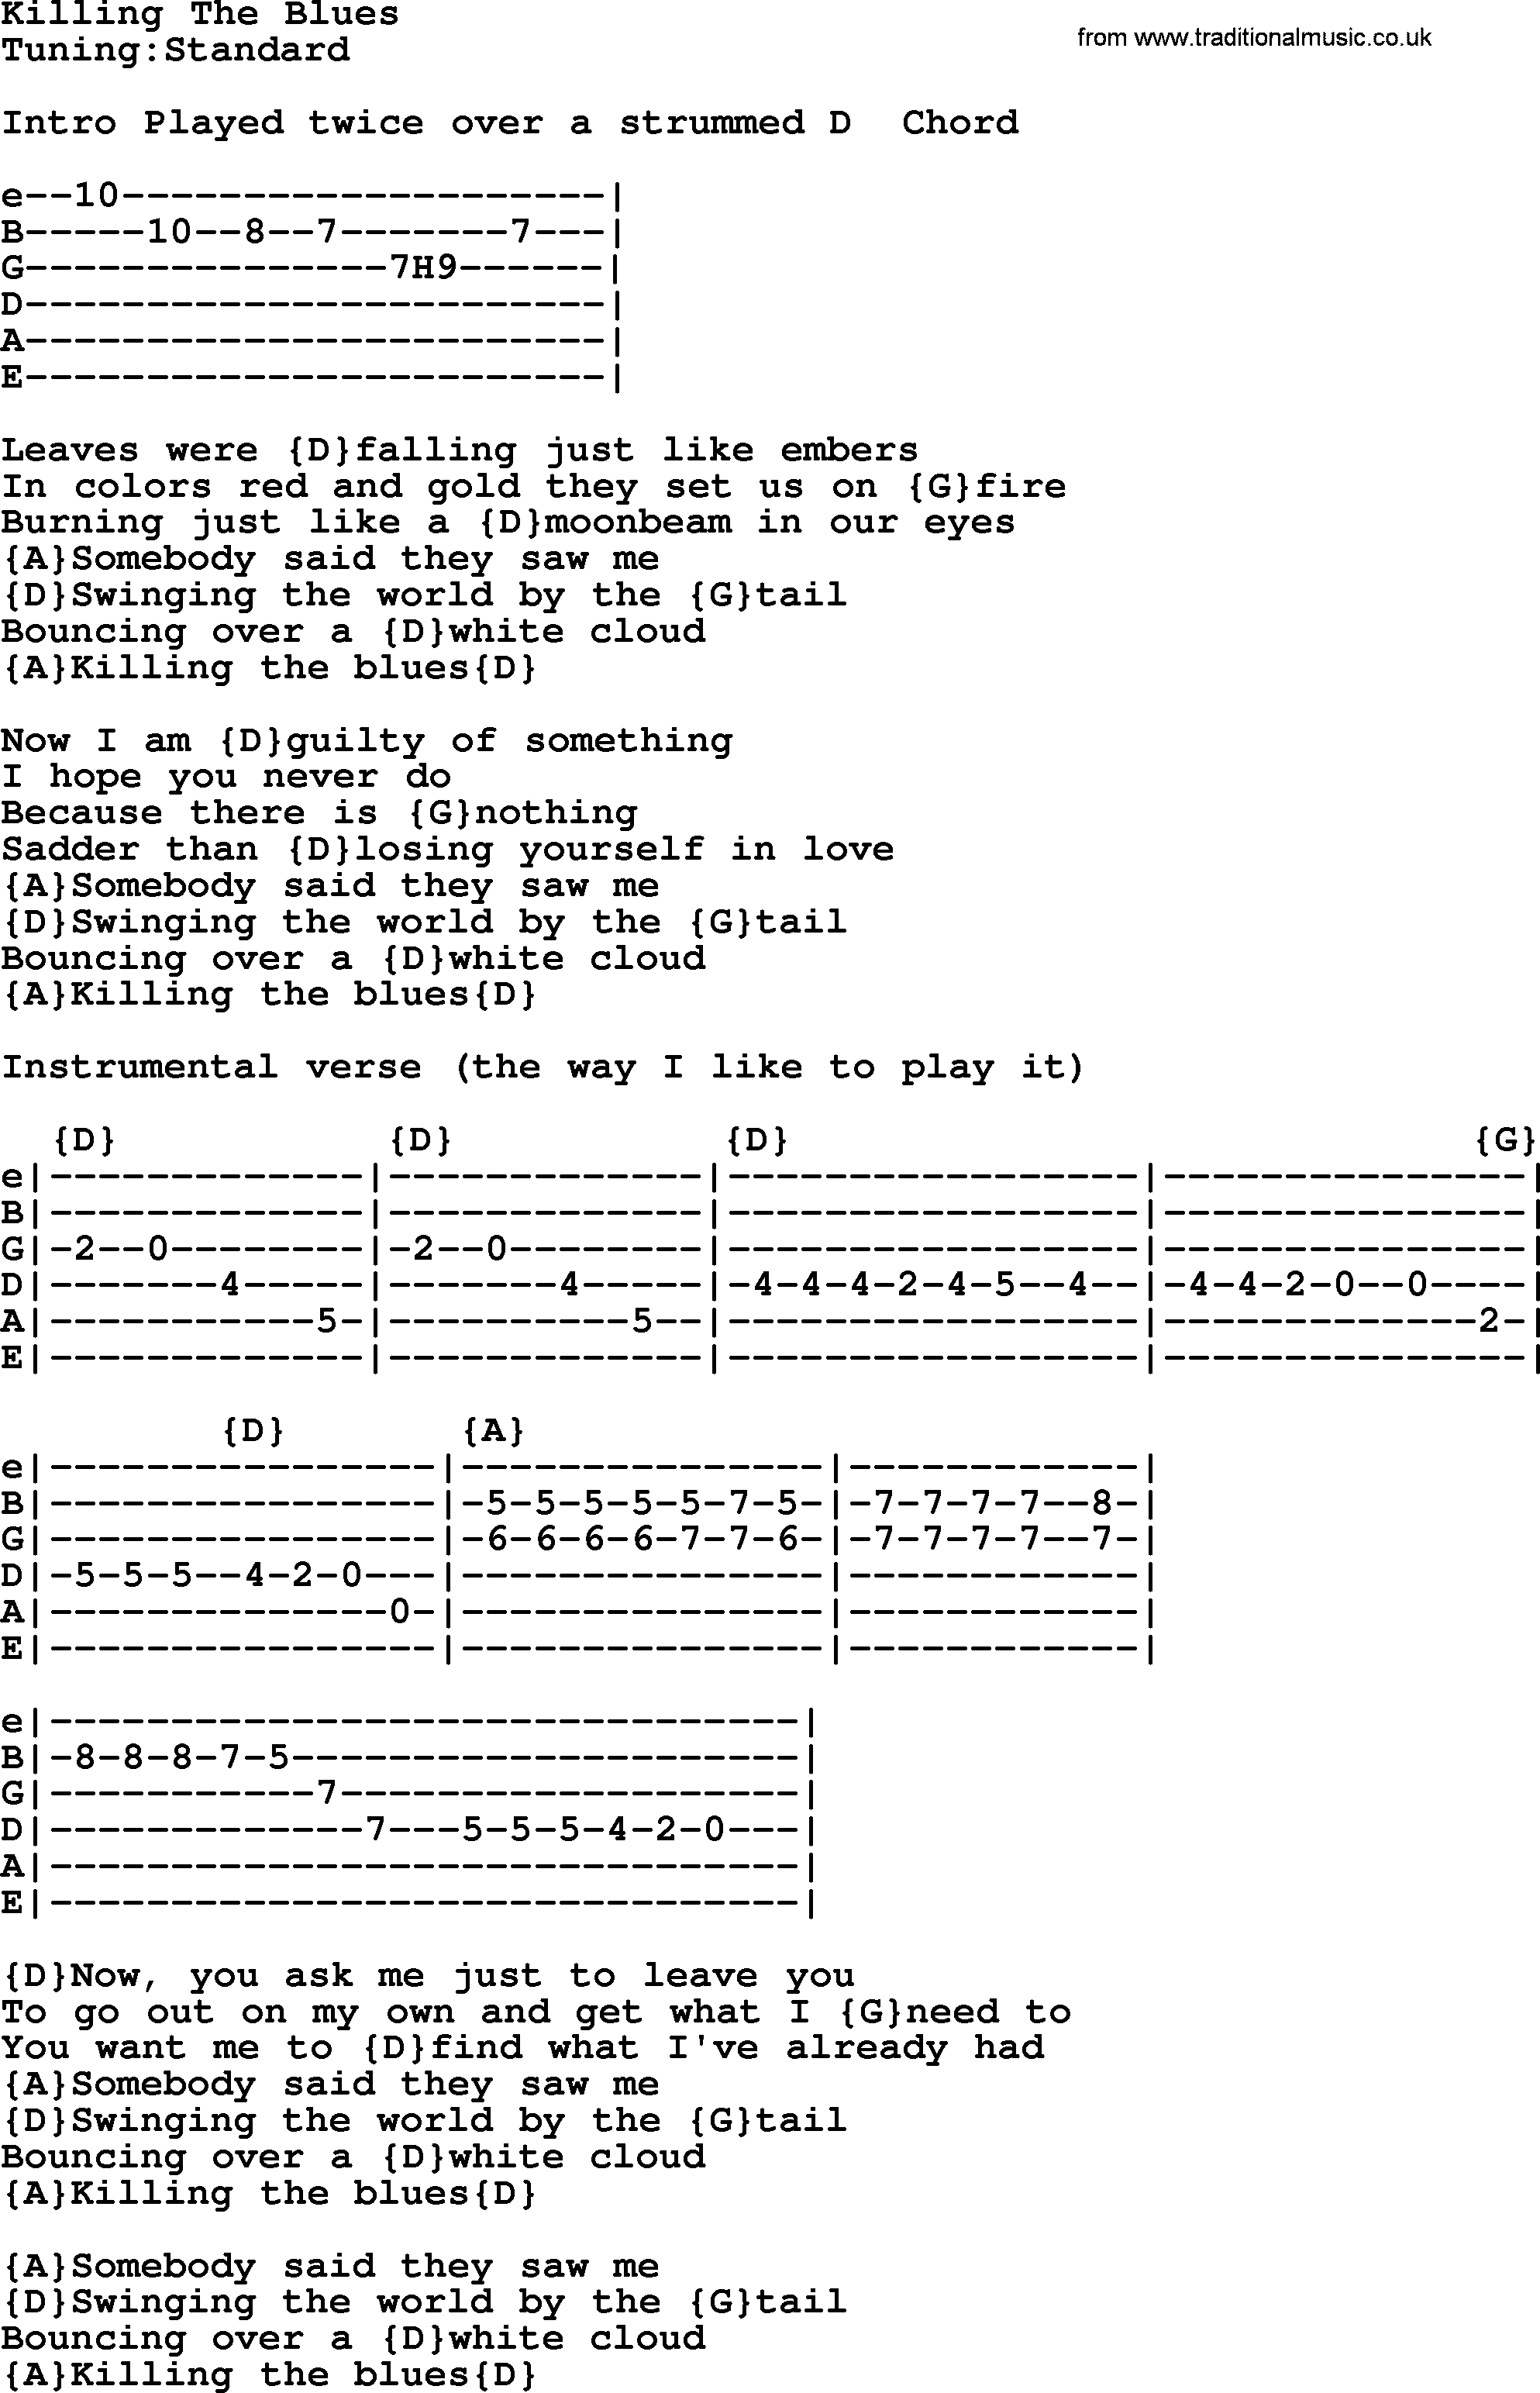 Bluegrass song: Killing The Blues, lyrics and chords